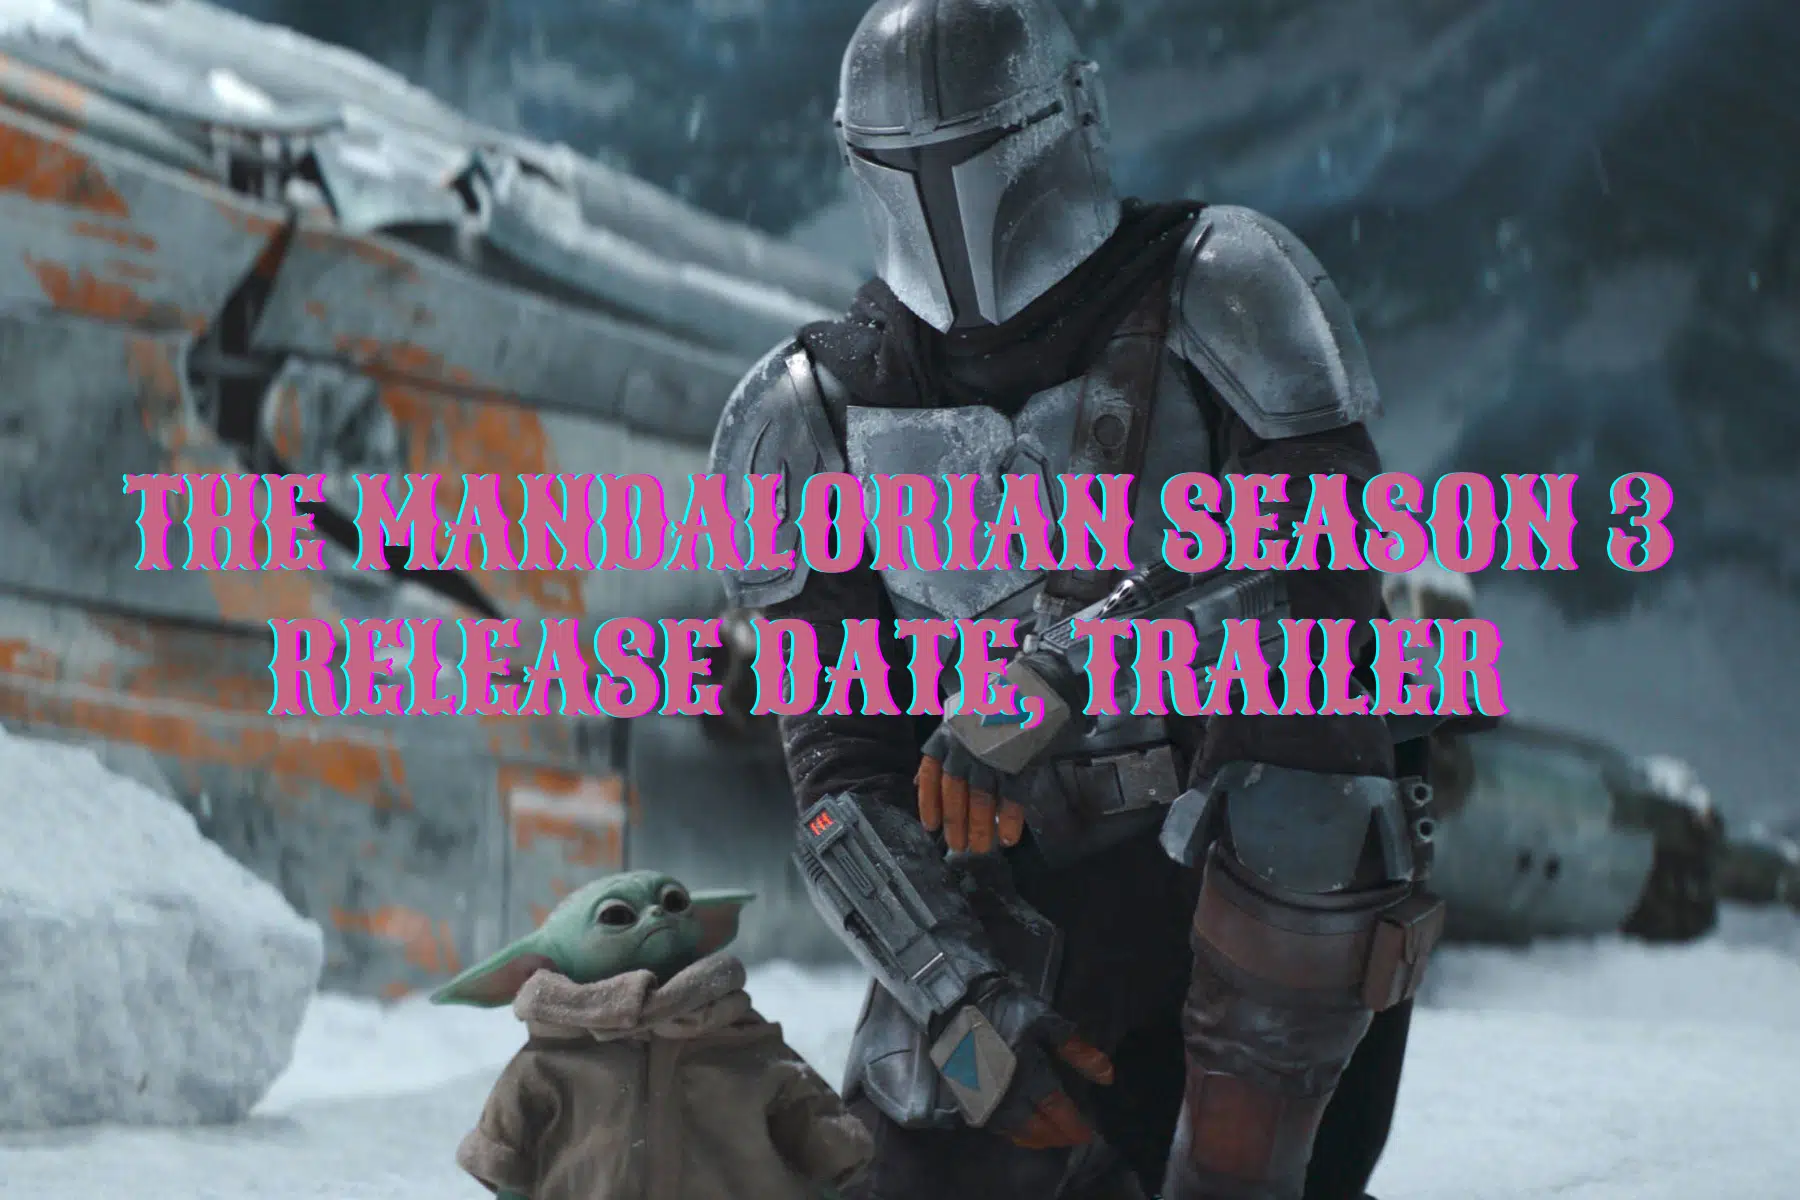 The Mandalorian Season 3 Release Date, Trailer - Everything We Know So Far!